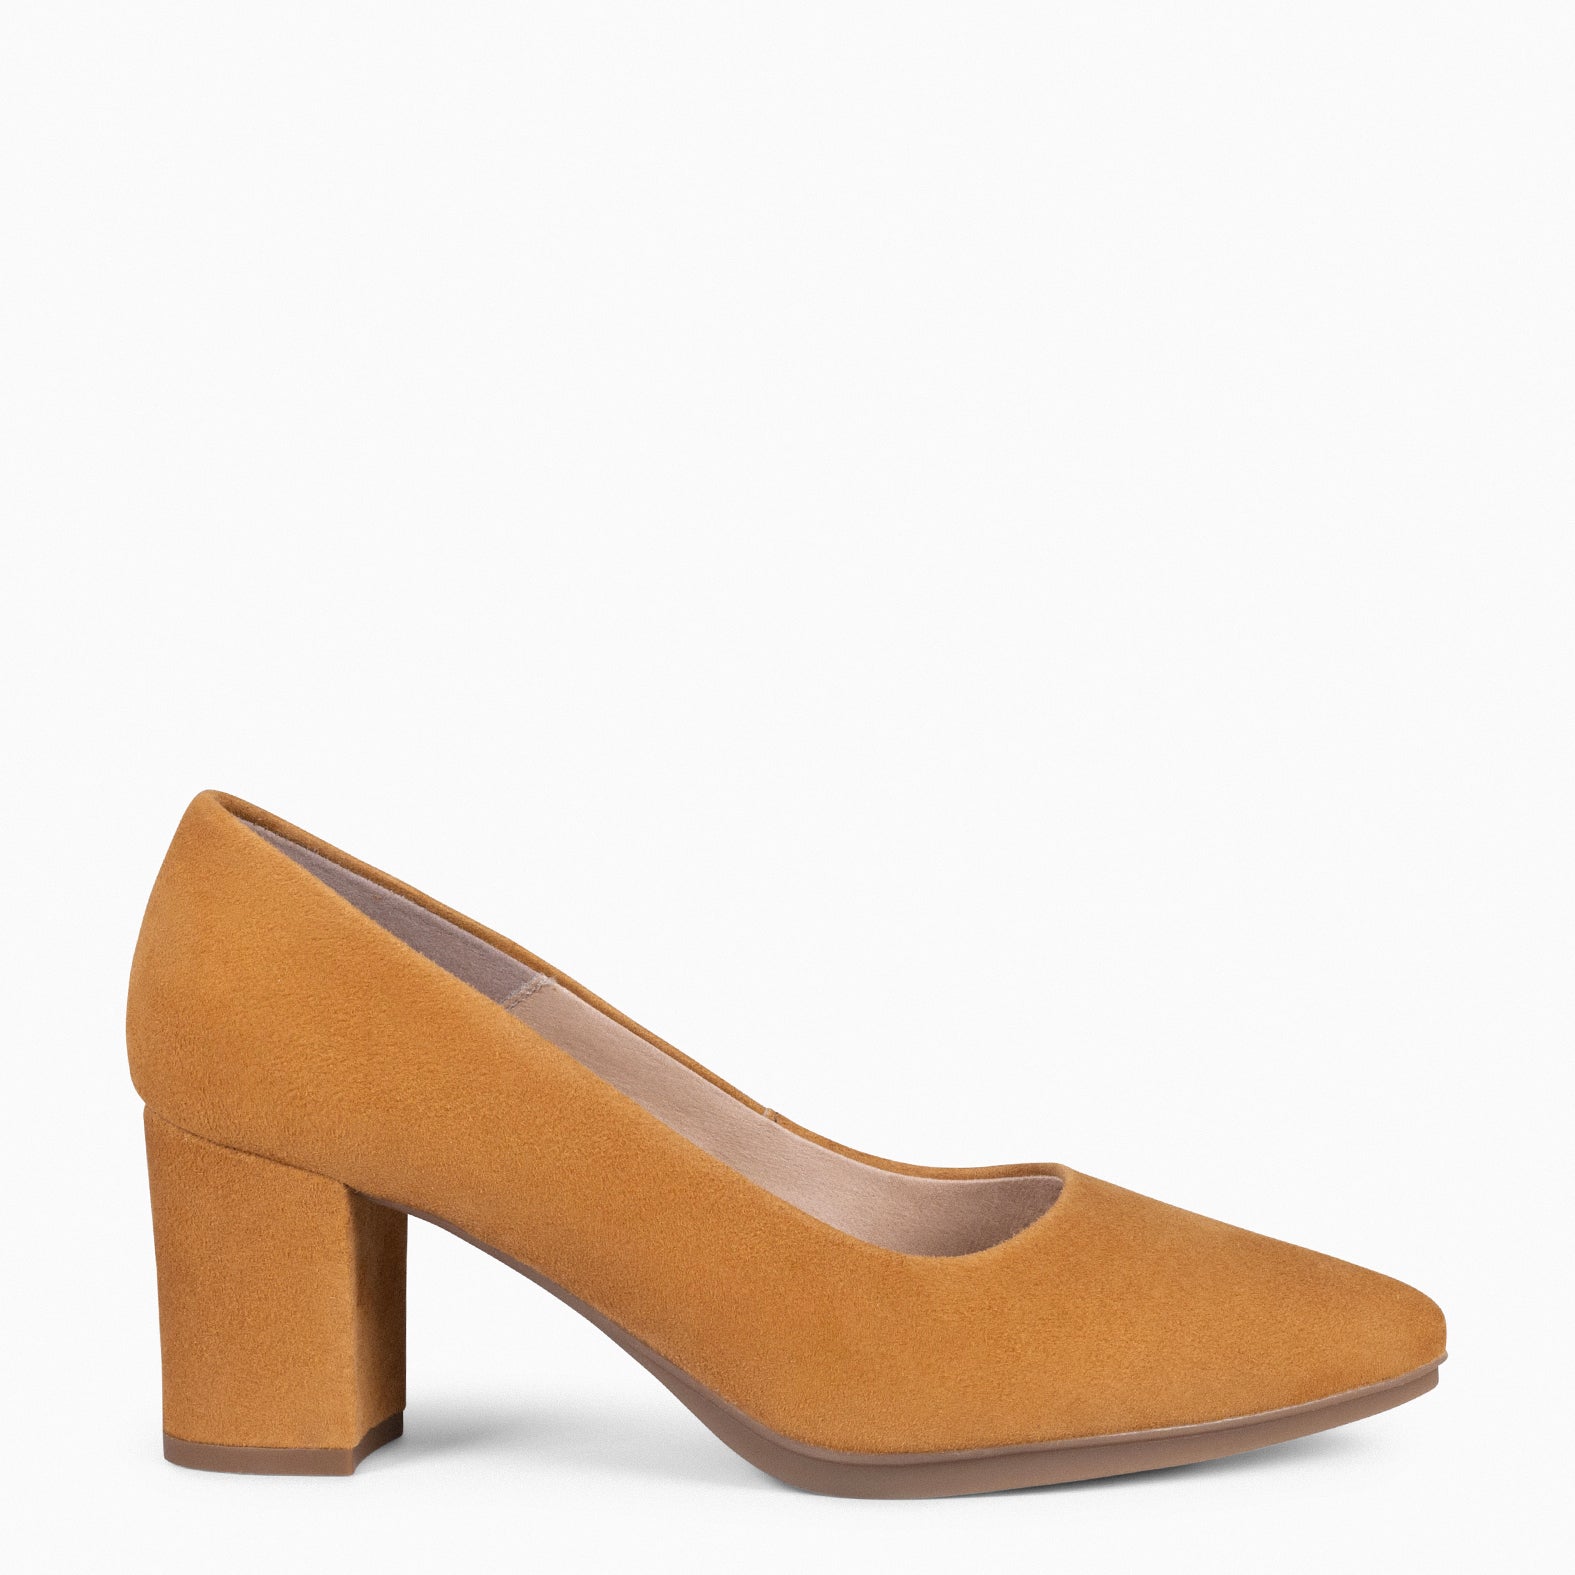 URBAN S – BROWN Suede Mid-Heeled Shoes 